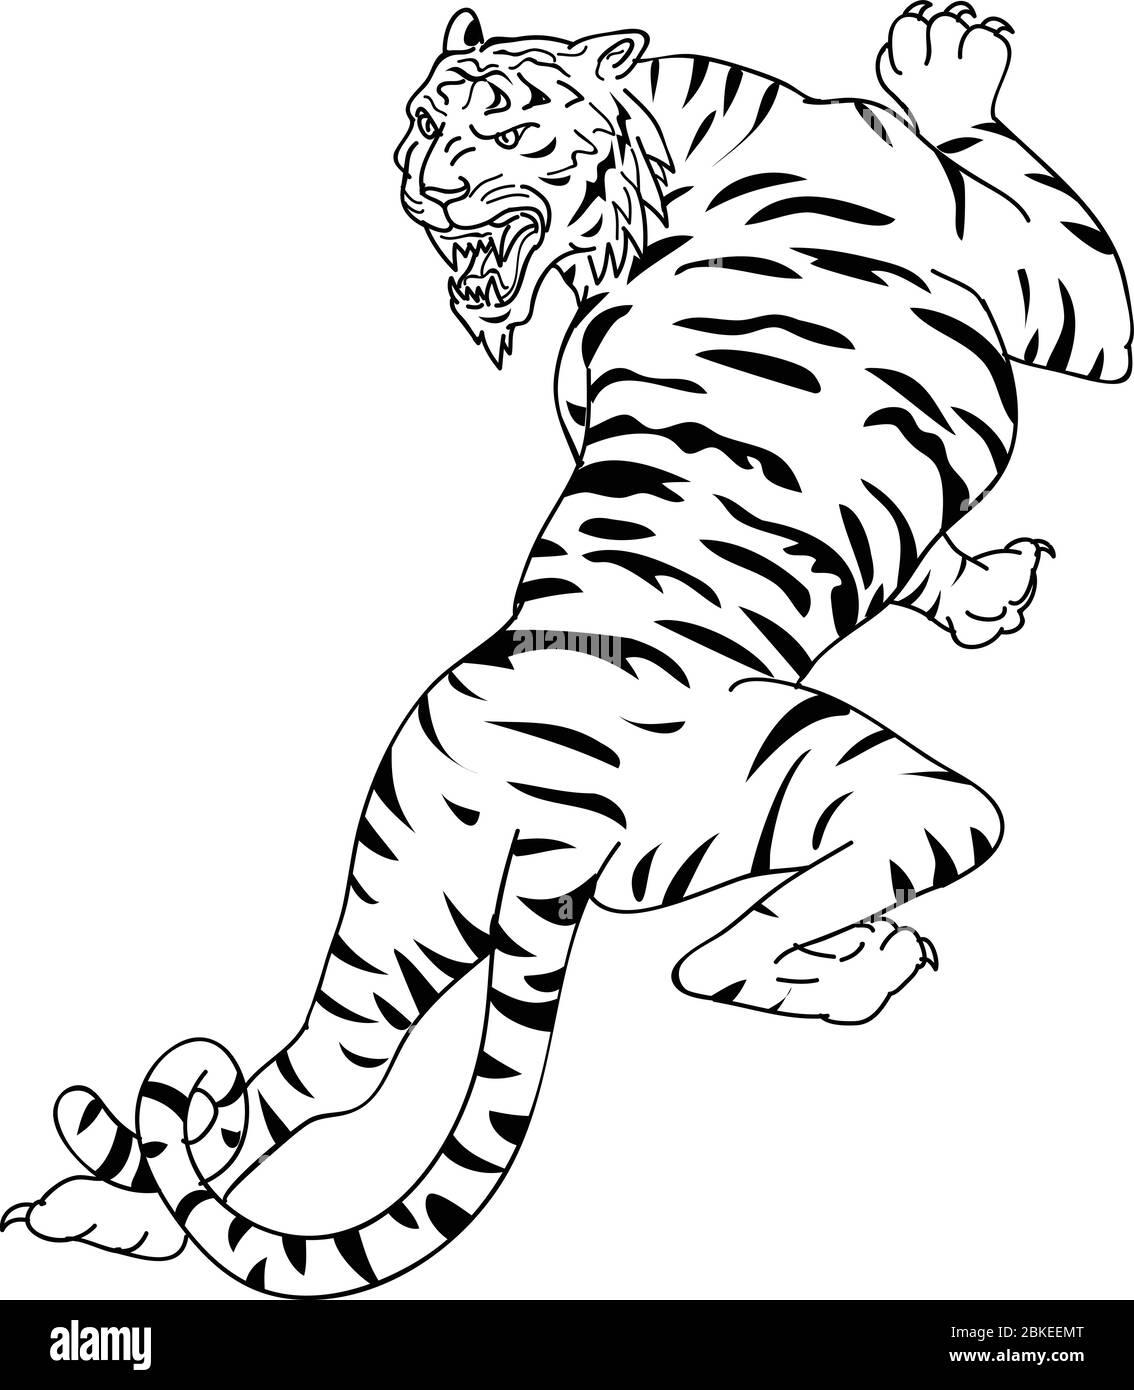 Tiger Black And White Tiger Clipart Black And White  Draw A Bengal Tiger  PNG Image  Transparent PNG Free Download on SeekPNG